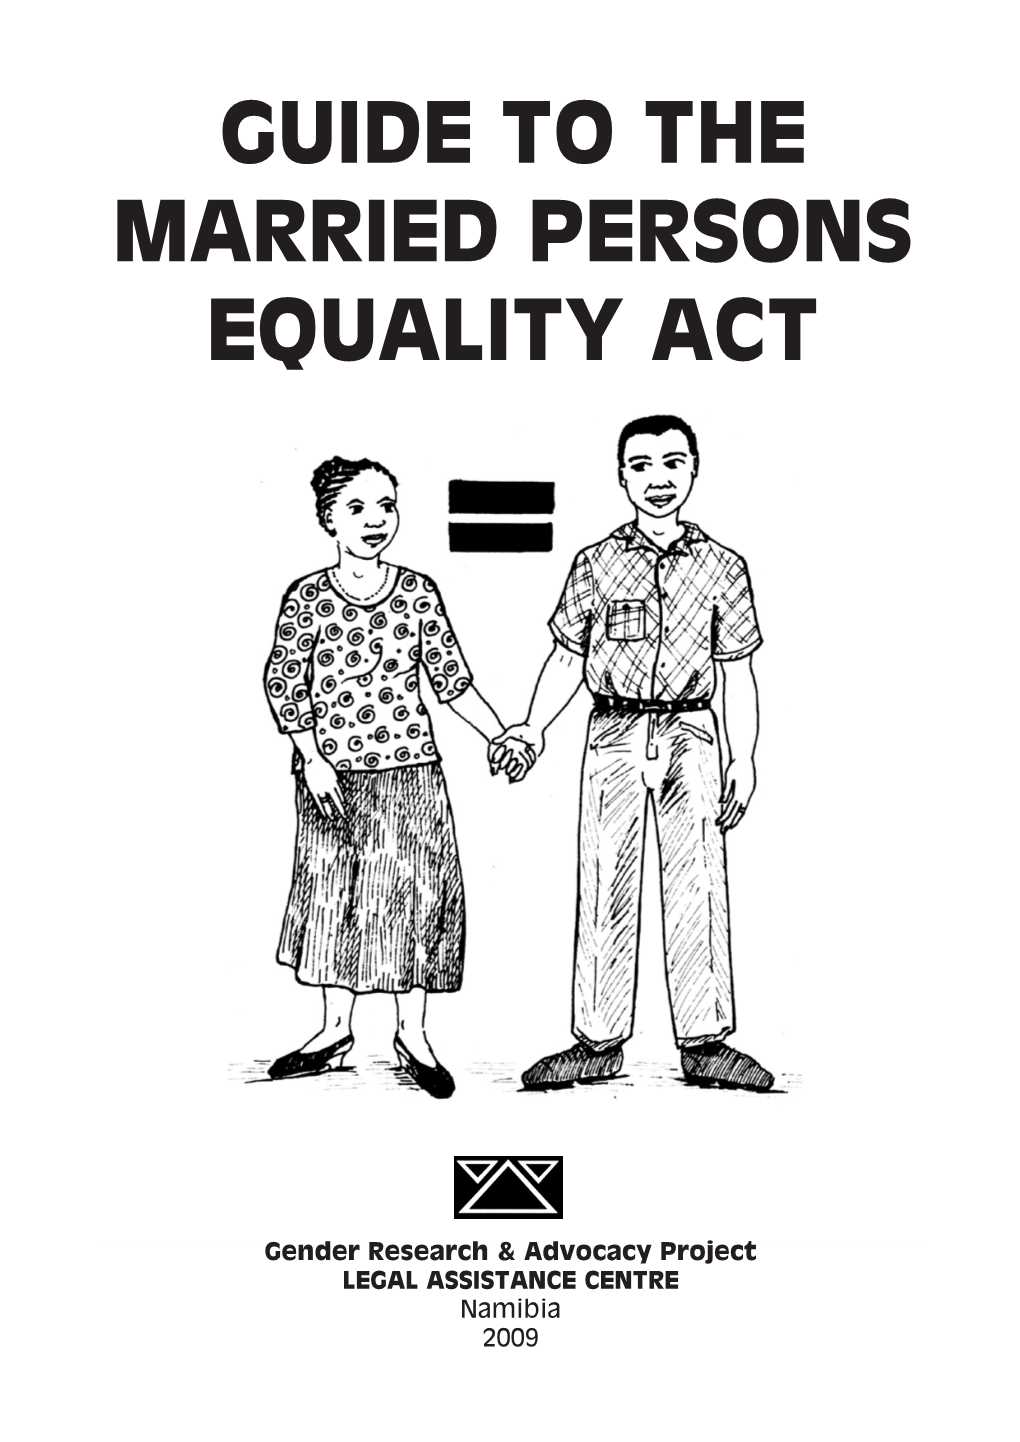 Guide to the Married Persons Equality Act